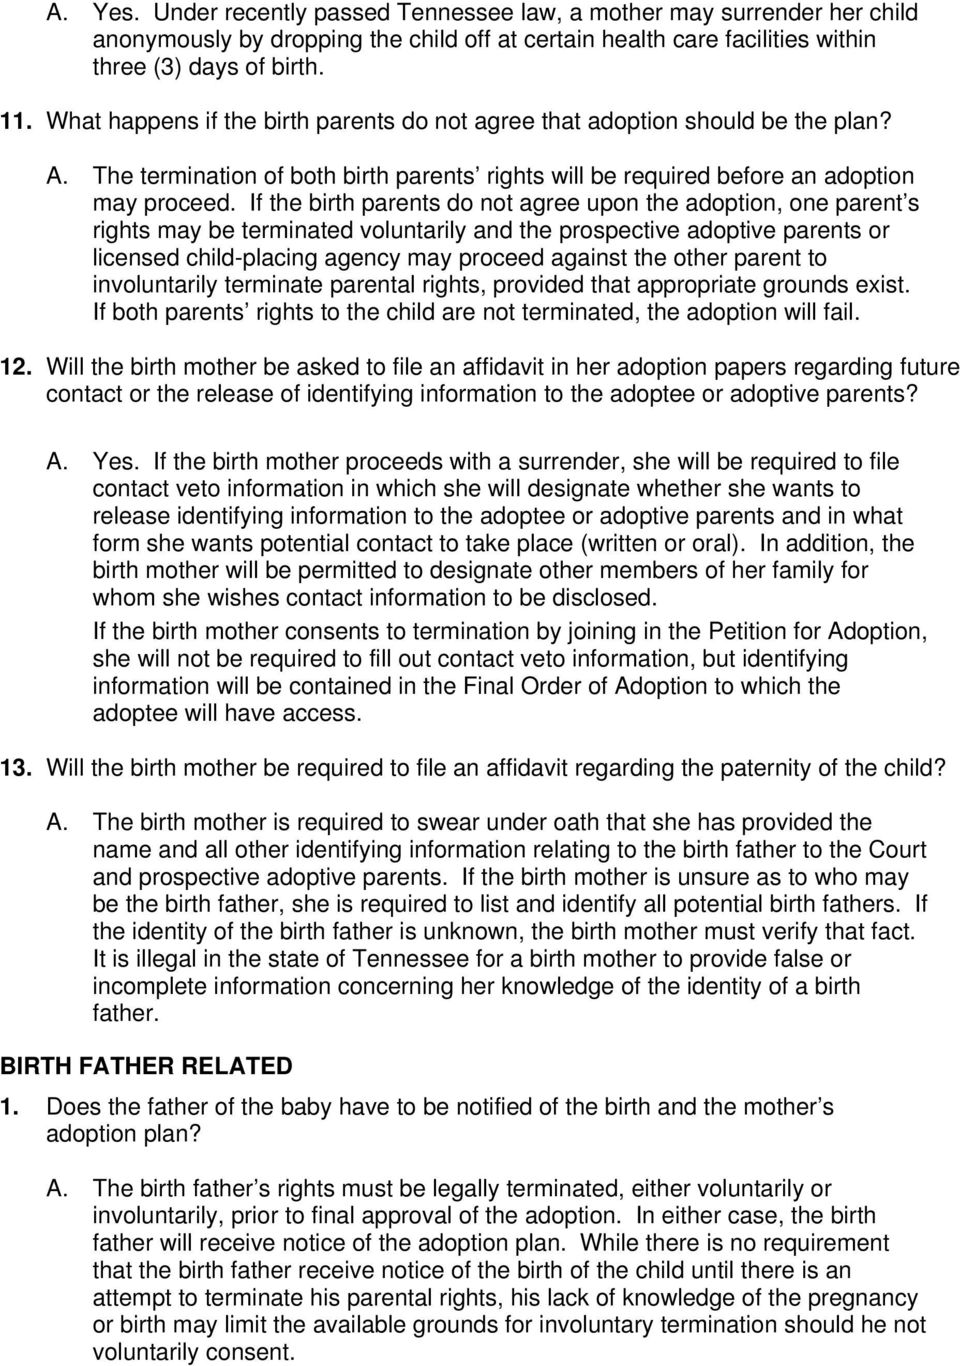 If the birth parents do not agree upon the adoption, one parent s rights may be terminated voluntarily and the prospective adoptive parents or licensed child-placing agency may proceed against the